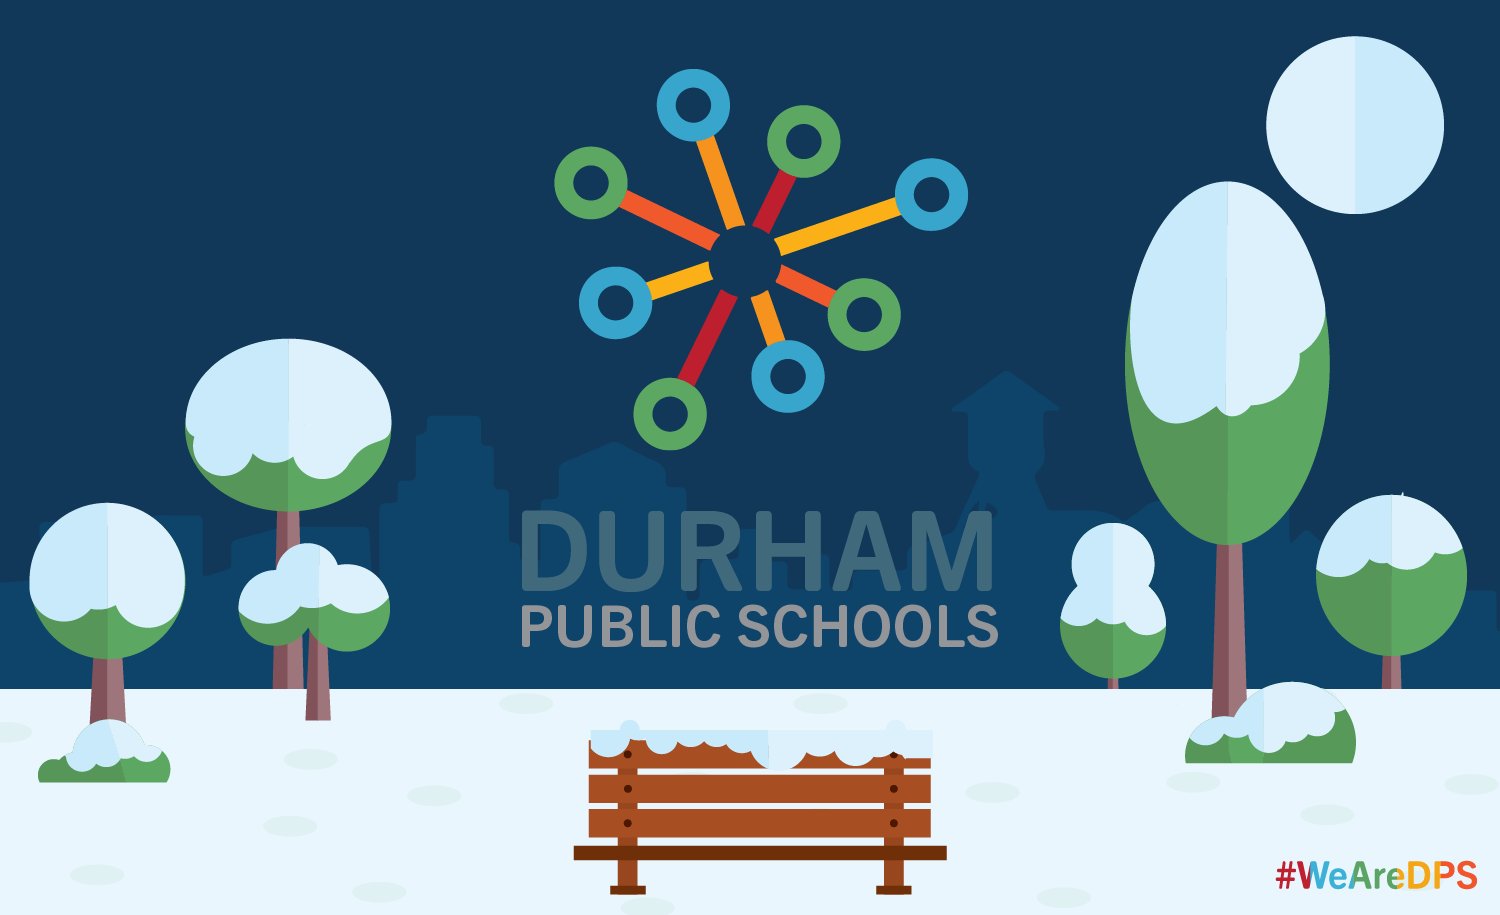 Durham Public Schools On Twitter Dpsalert Our 2021 22 Traditional And Year Round Calendars Are Now Available On Our Website At Https T Co G2rodiarsy Link Https T Co 6mvva7oecg Https T Co Se3twxww7f